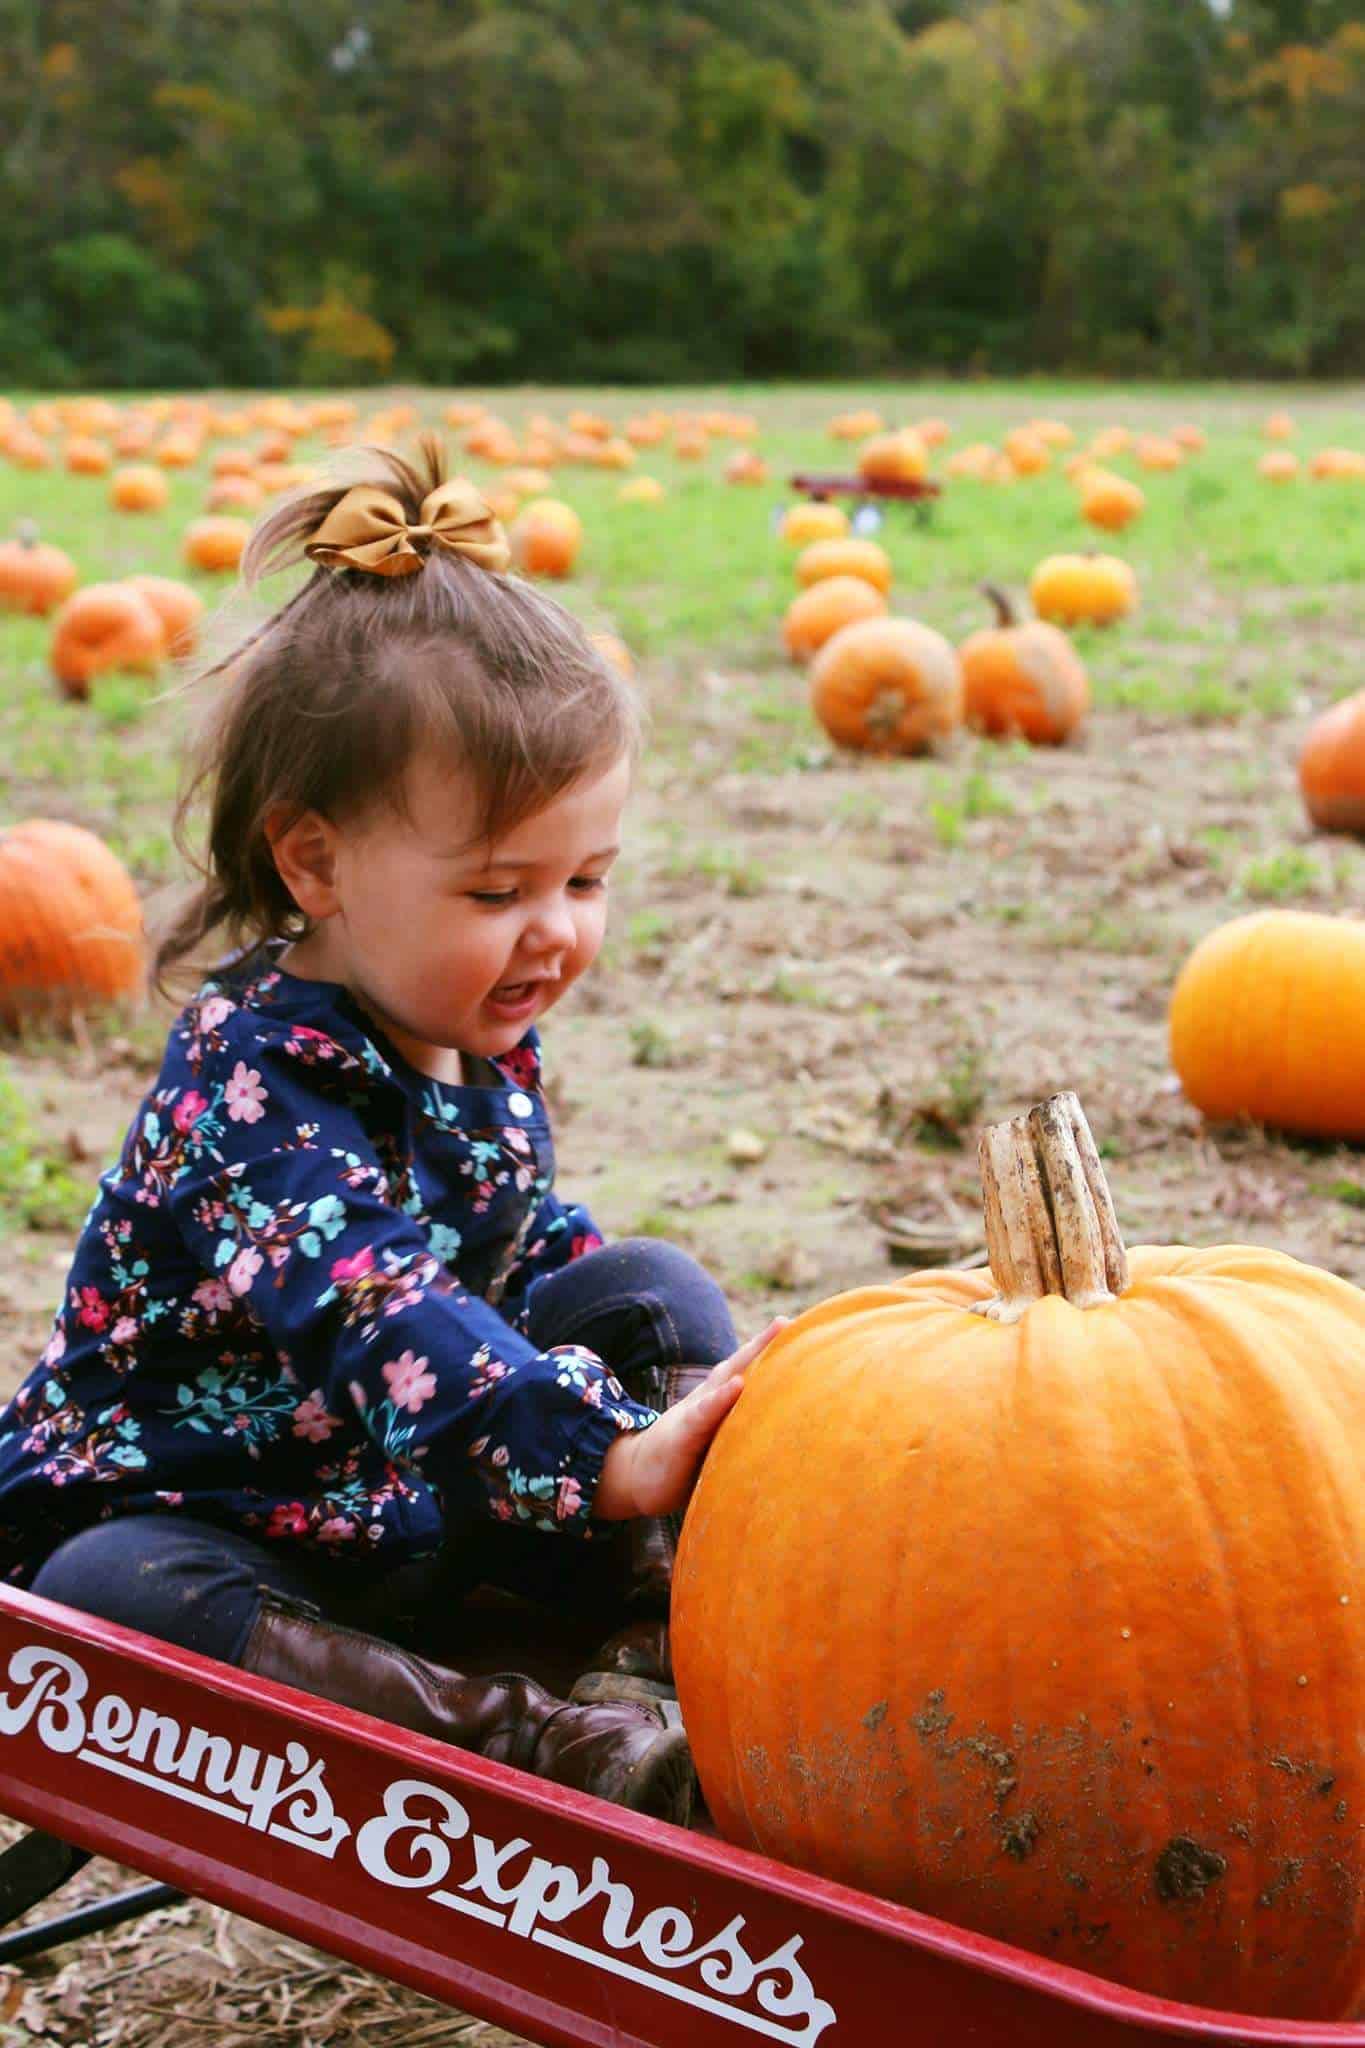 Toddler girl rides in red wagon with pumpkin from pumpkin patch.